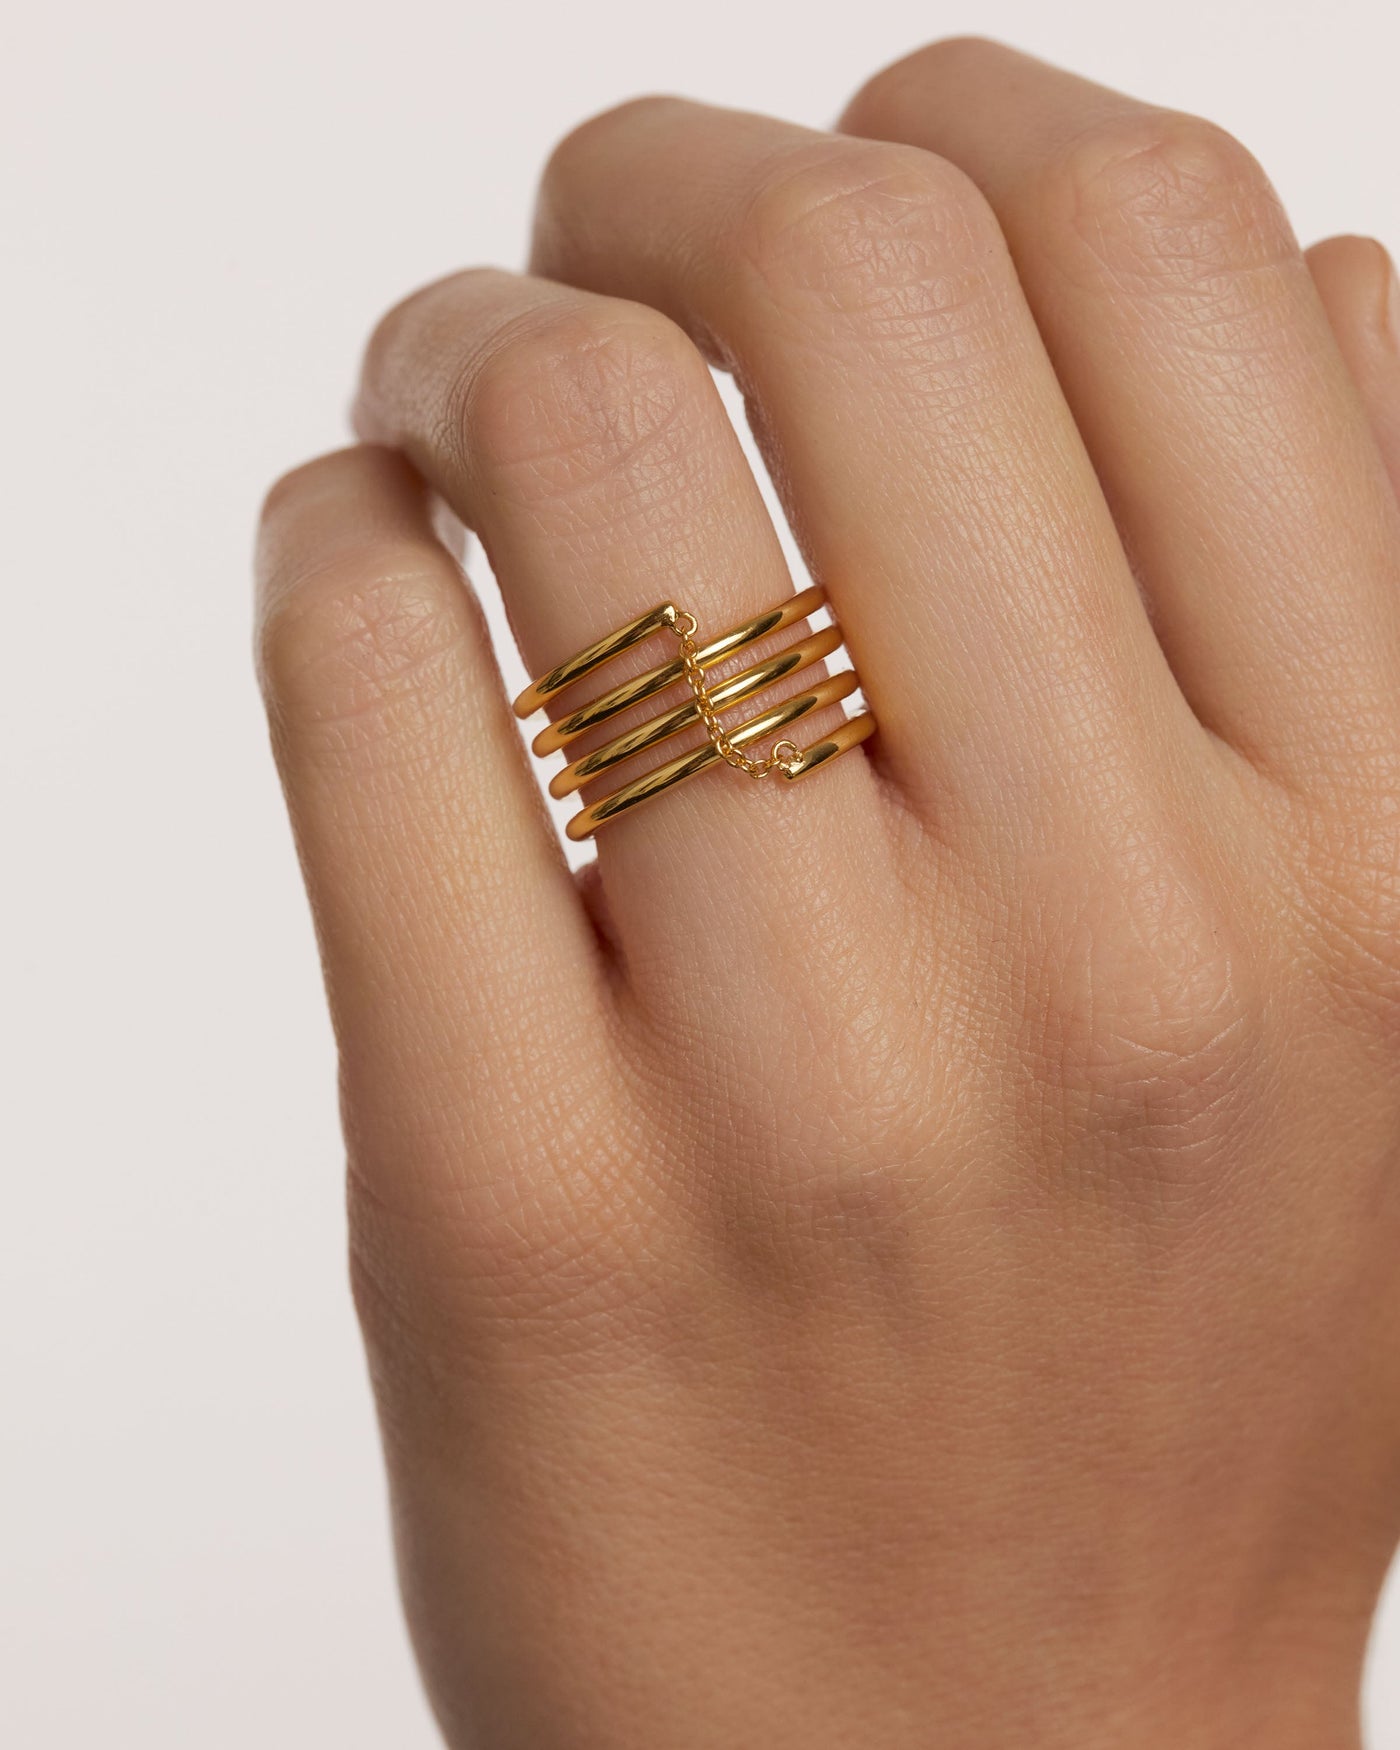 Stone Ring, Wide Ring Gold, Statement Rings, Gold Rings, Stone Jewelry,  Stackable Ring, Gift for Her, Made in Greece - Etsy